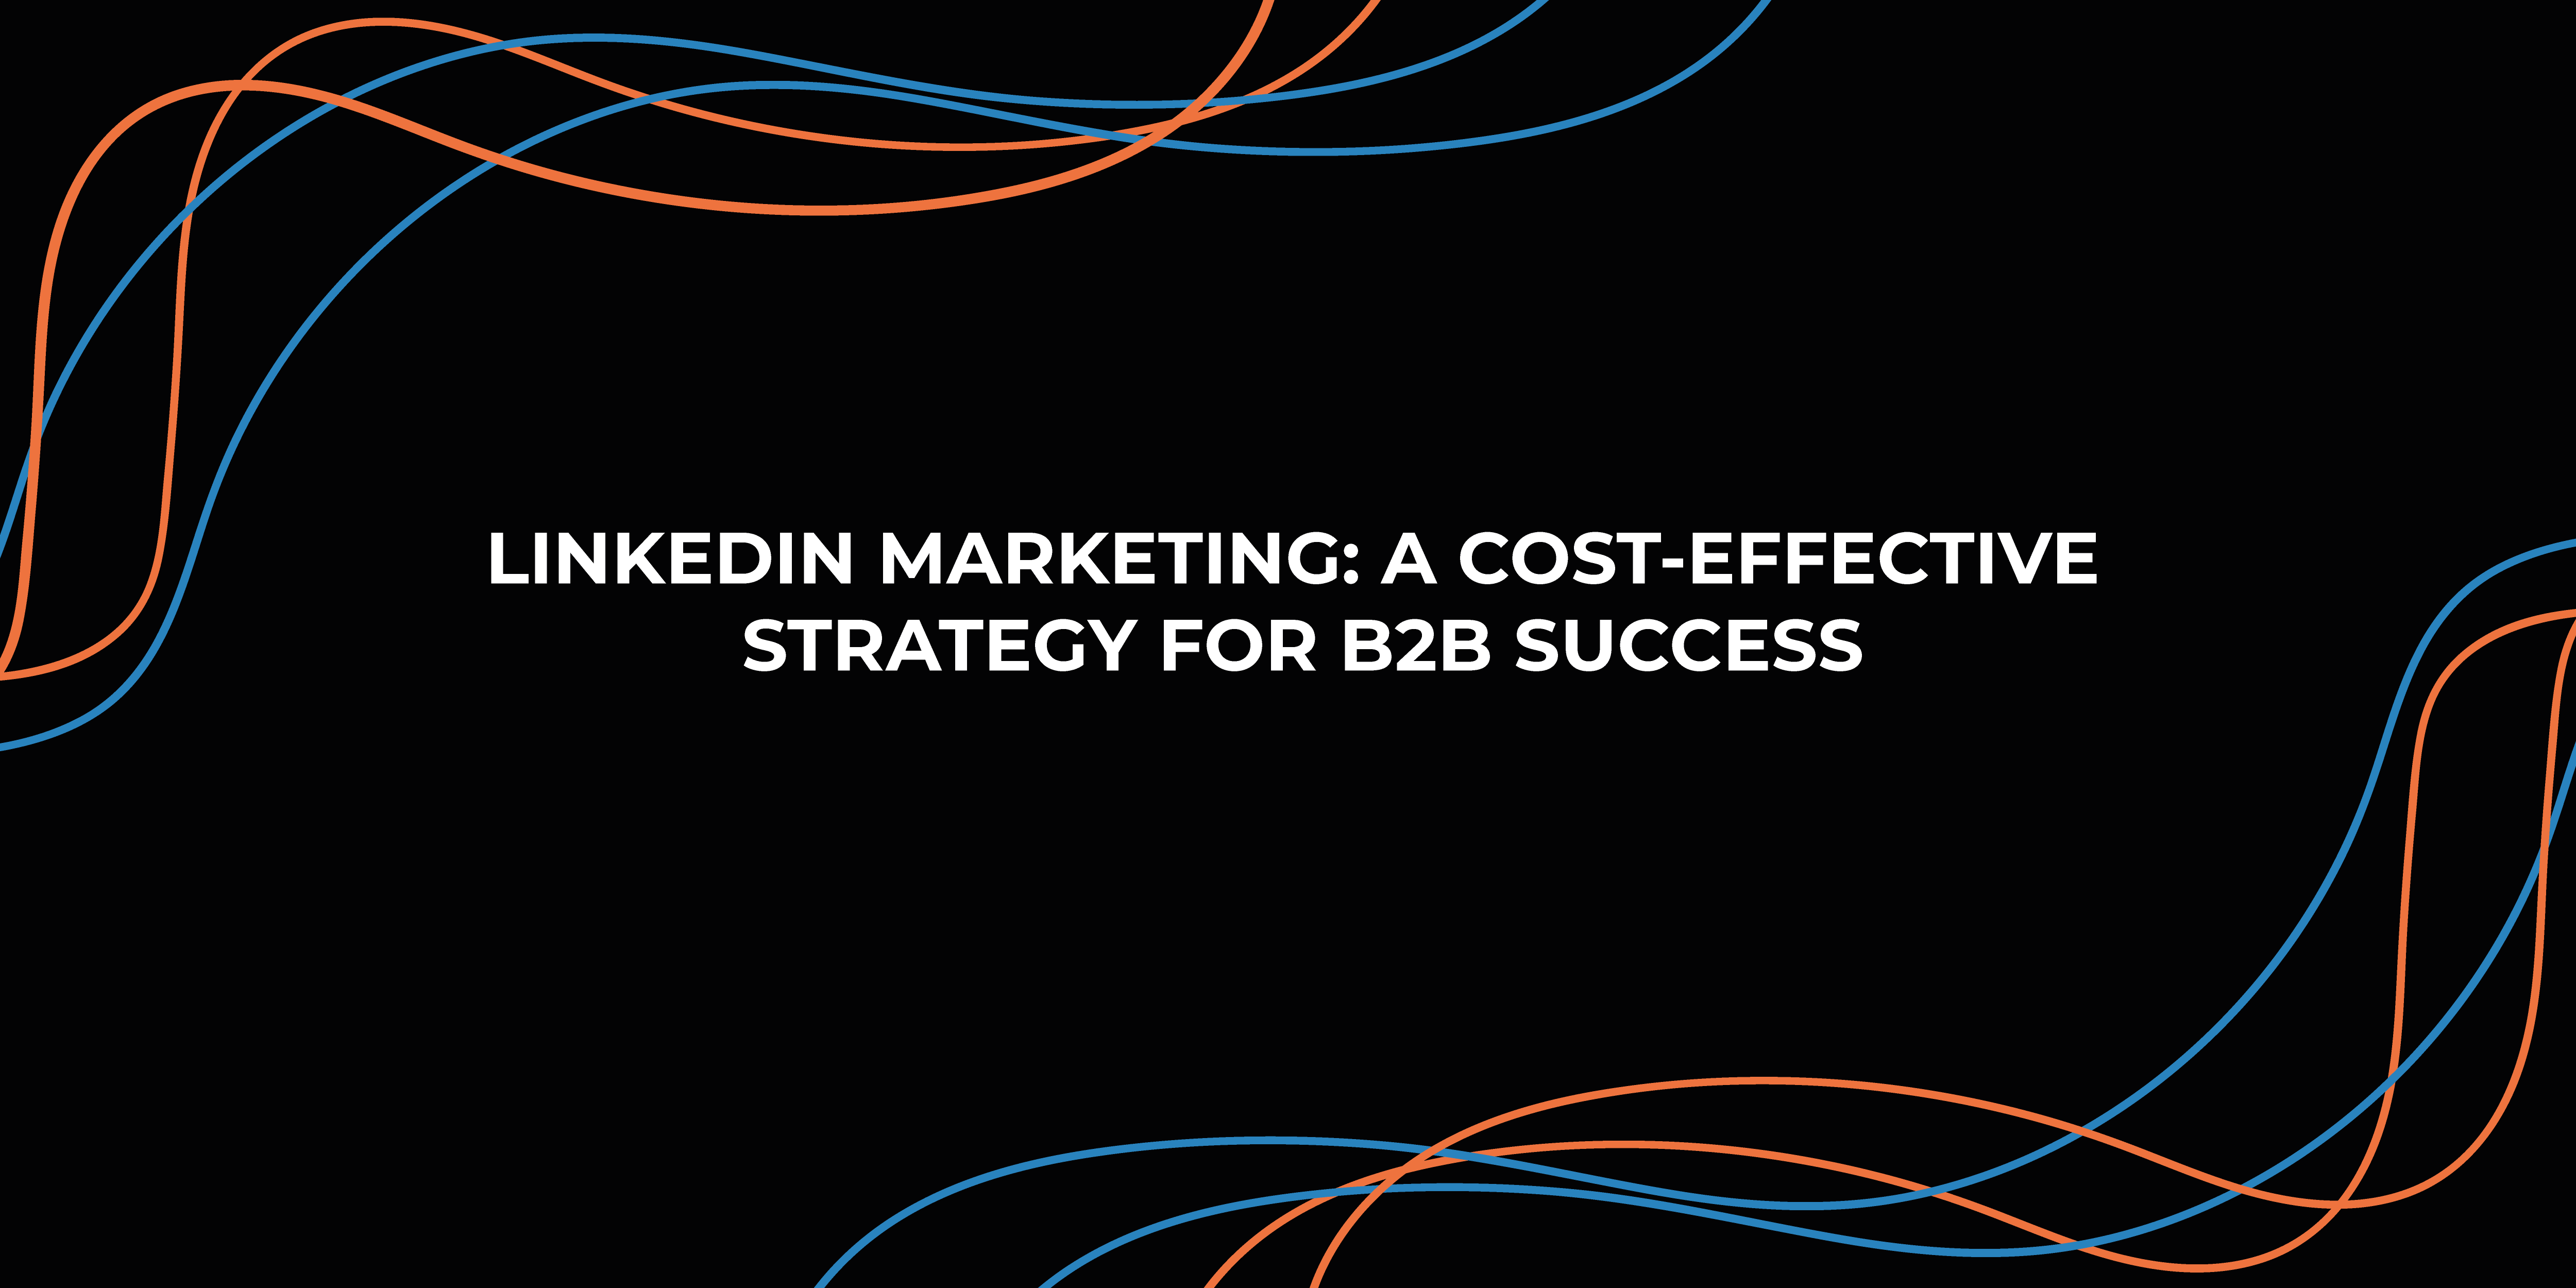 LinkedIn Marketing: A Cost-Effective Strategy for B2B Success